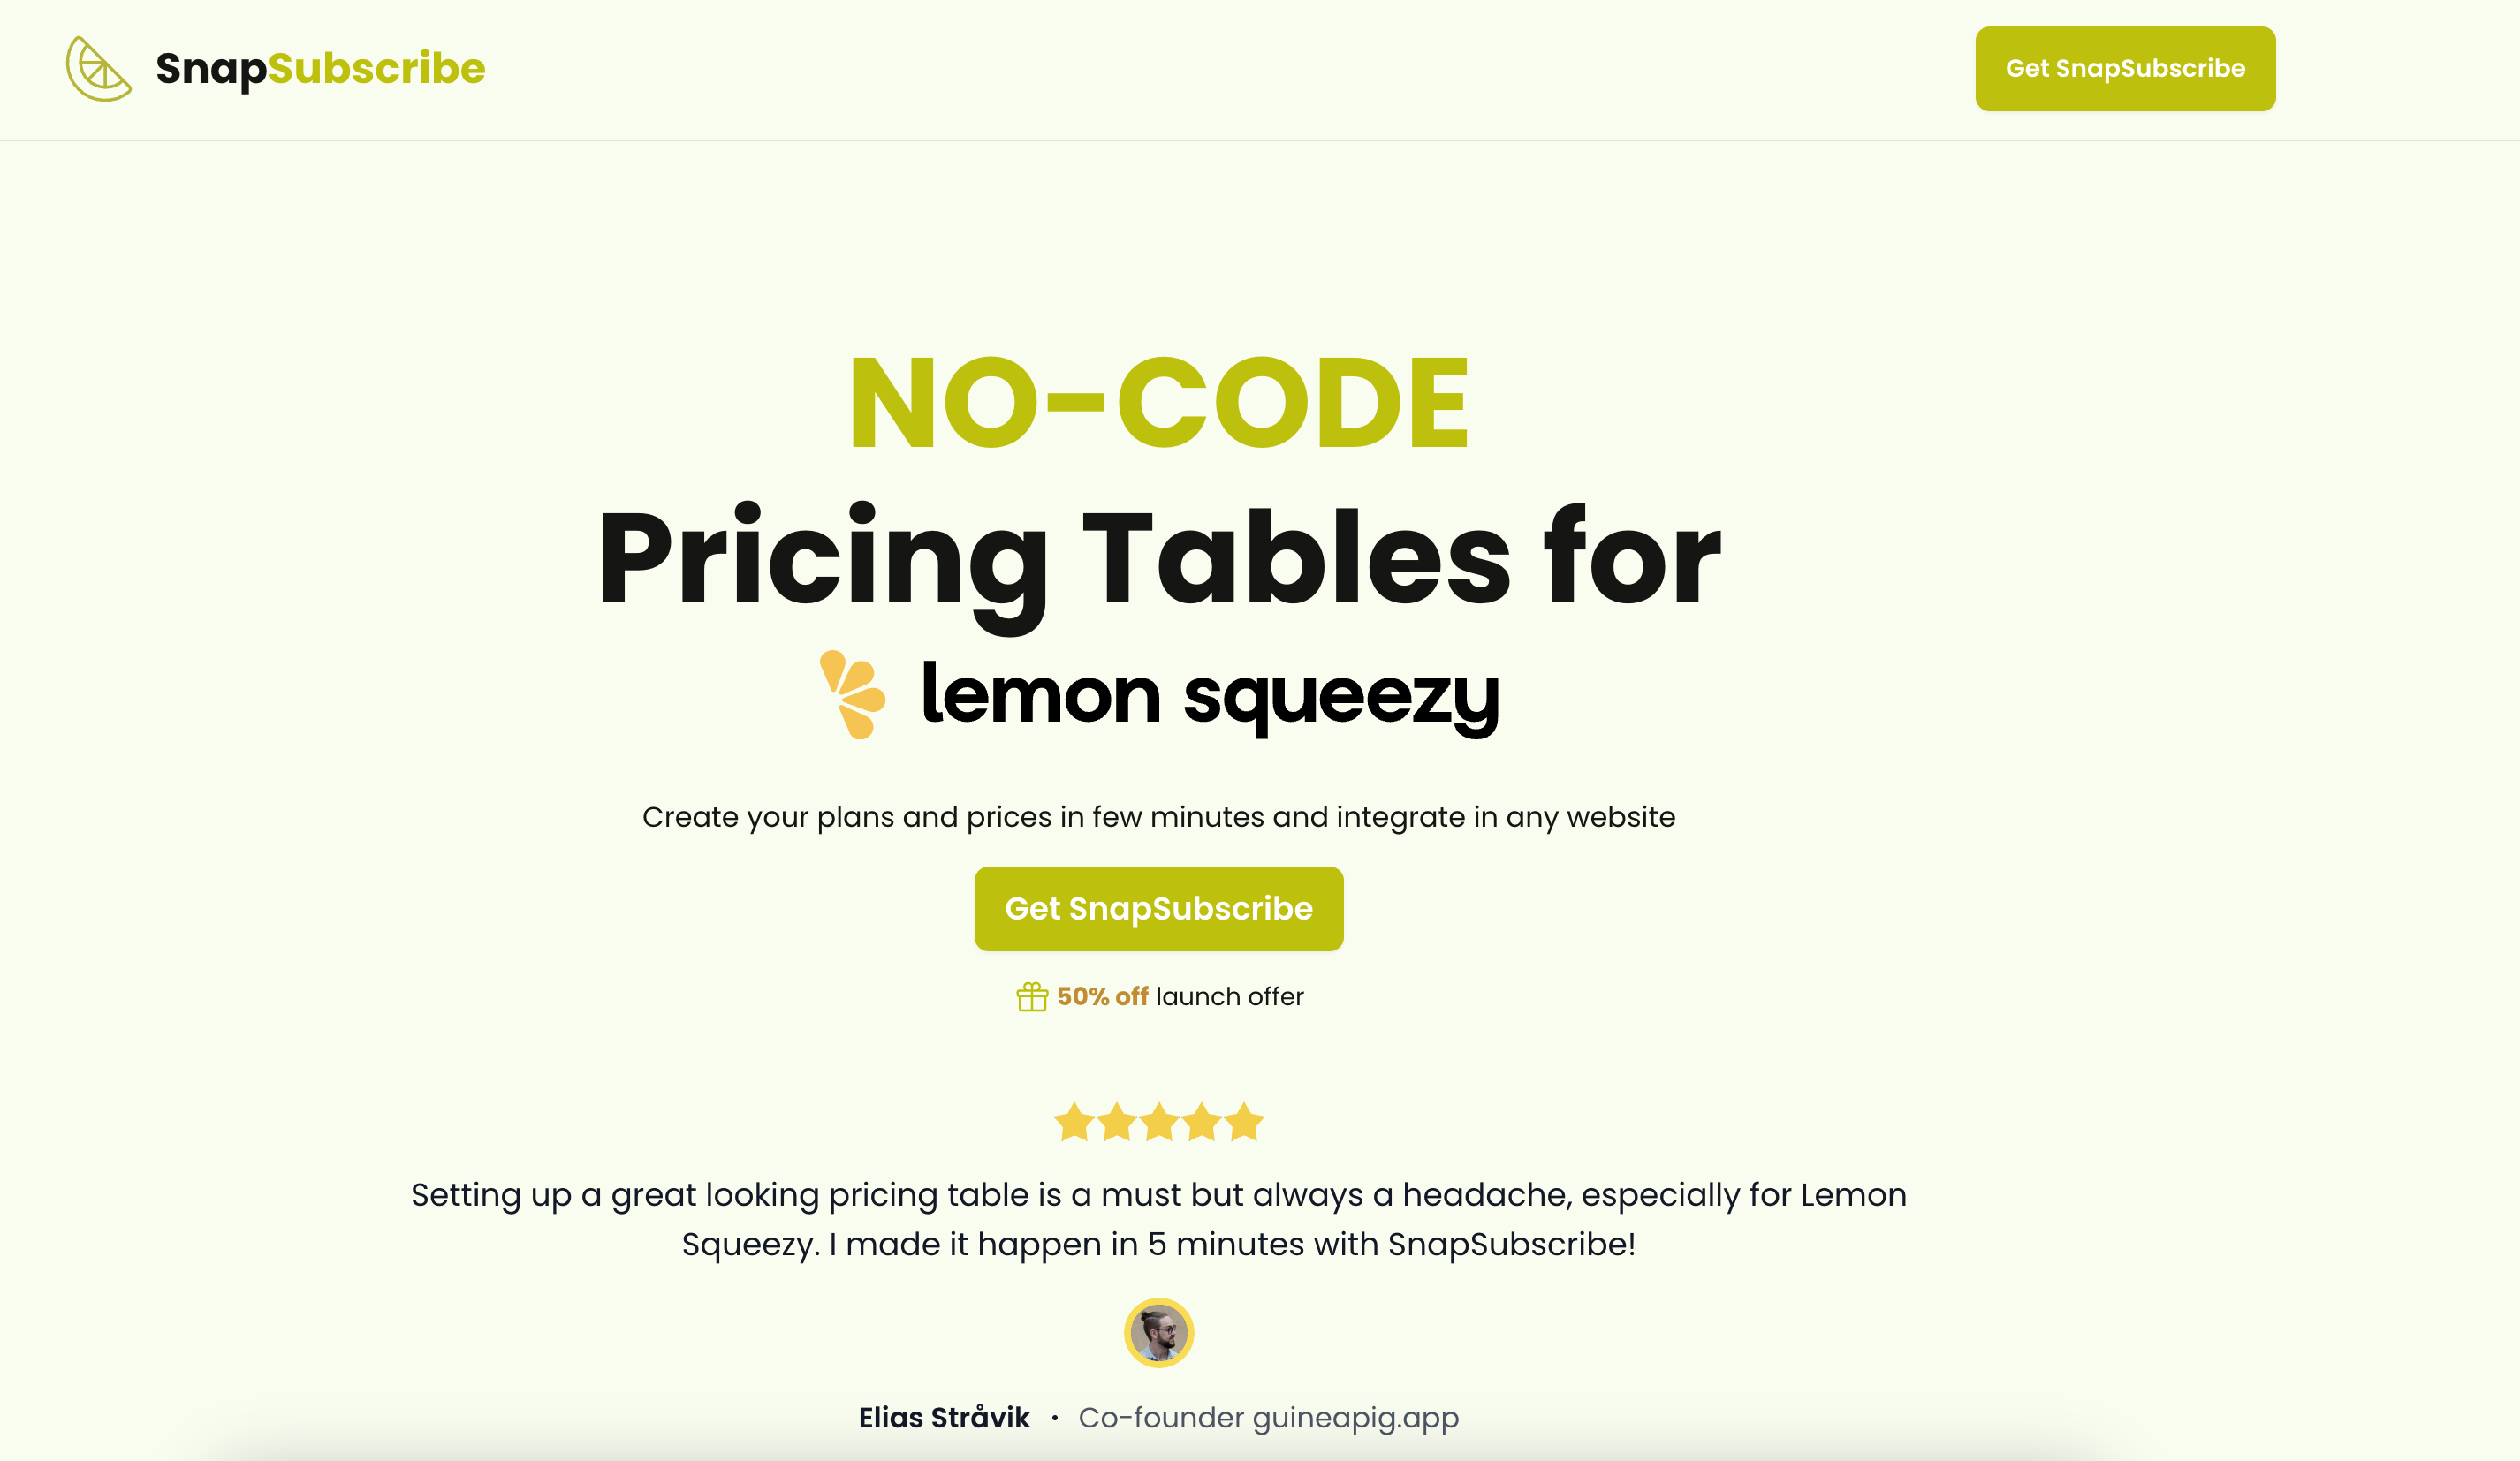 snapsubscribe - No-Code Pricing Tables for LemonSqueezy